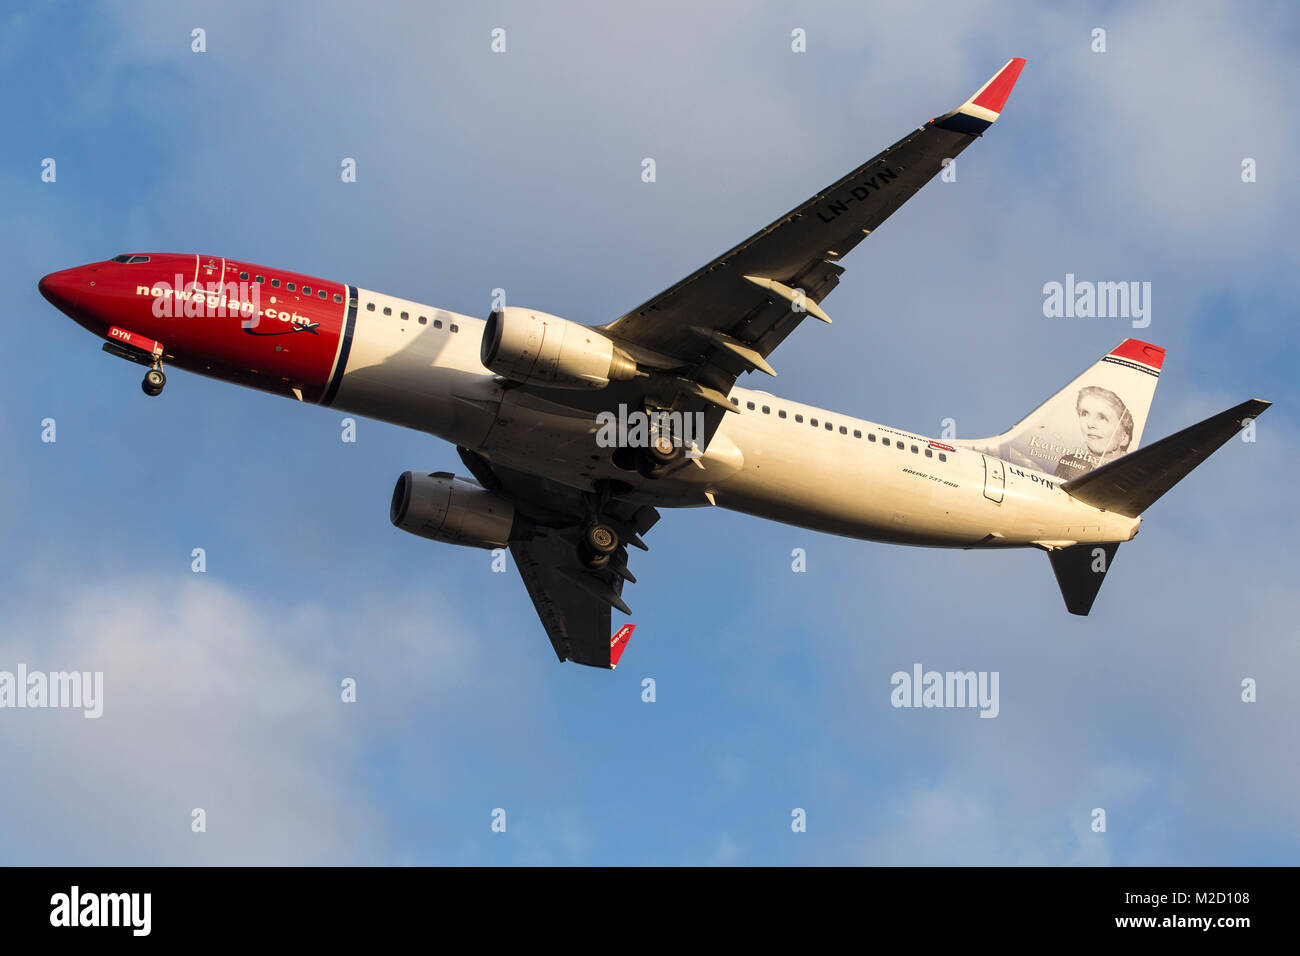 A Norweigan Air Shuttle Boeing 737-800 aircraft on final approach to London Gatwick airport on a January morning Stock Photo